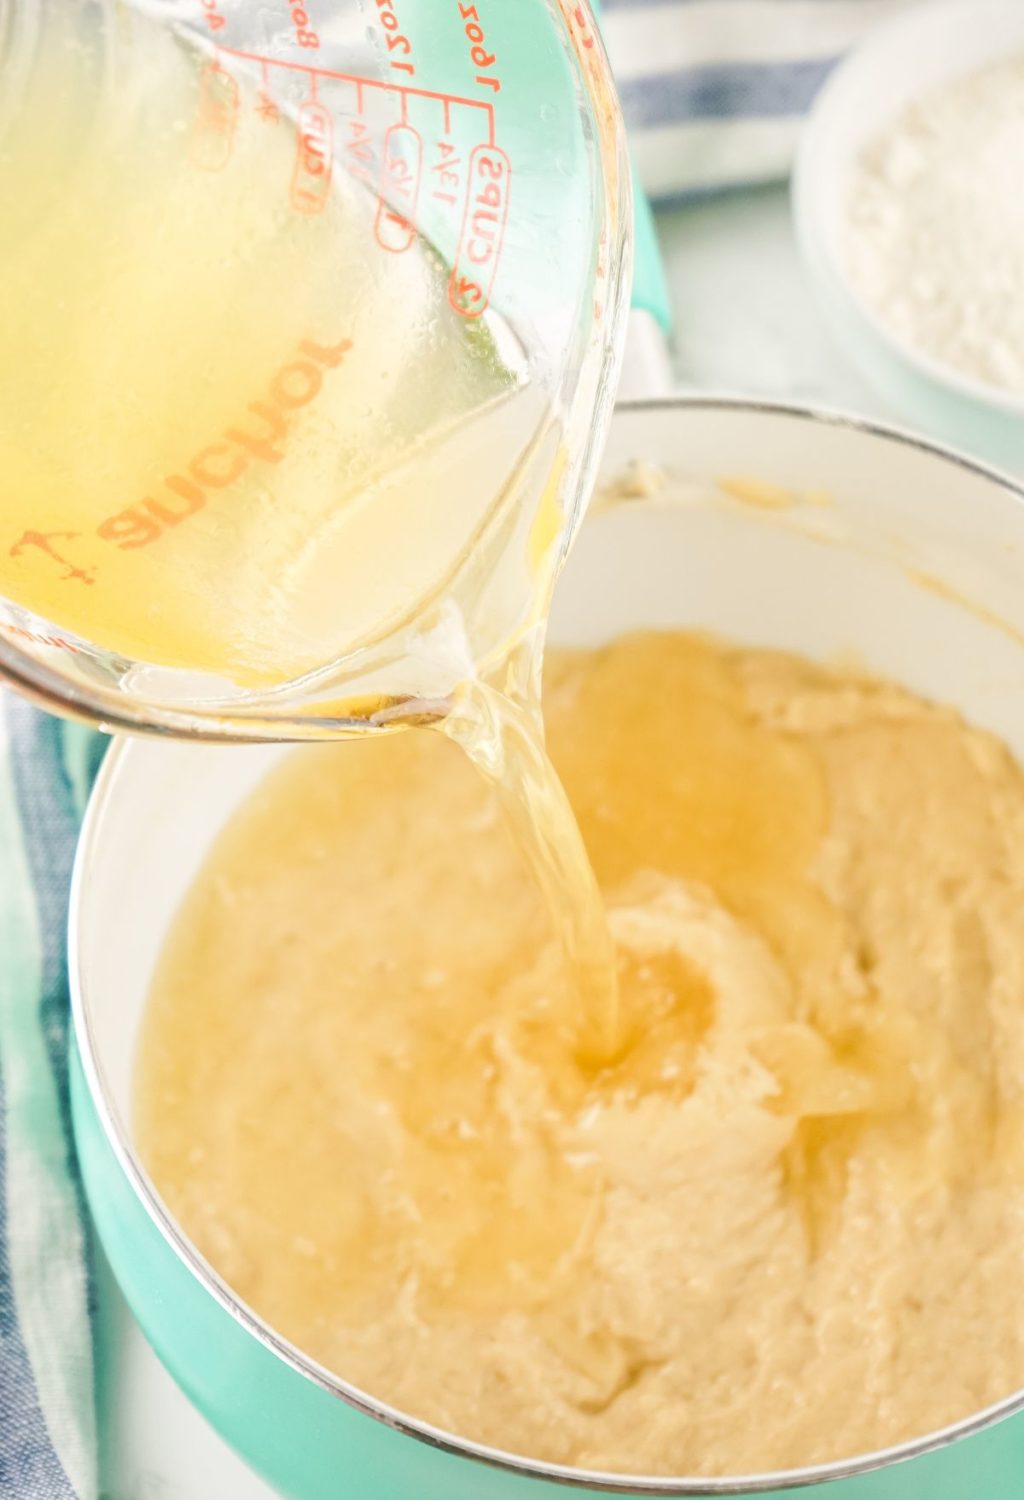 A yellow liquid is being poured into a bowl of batter.